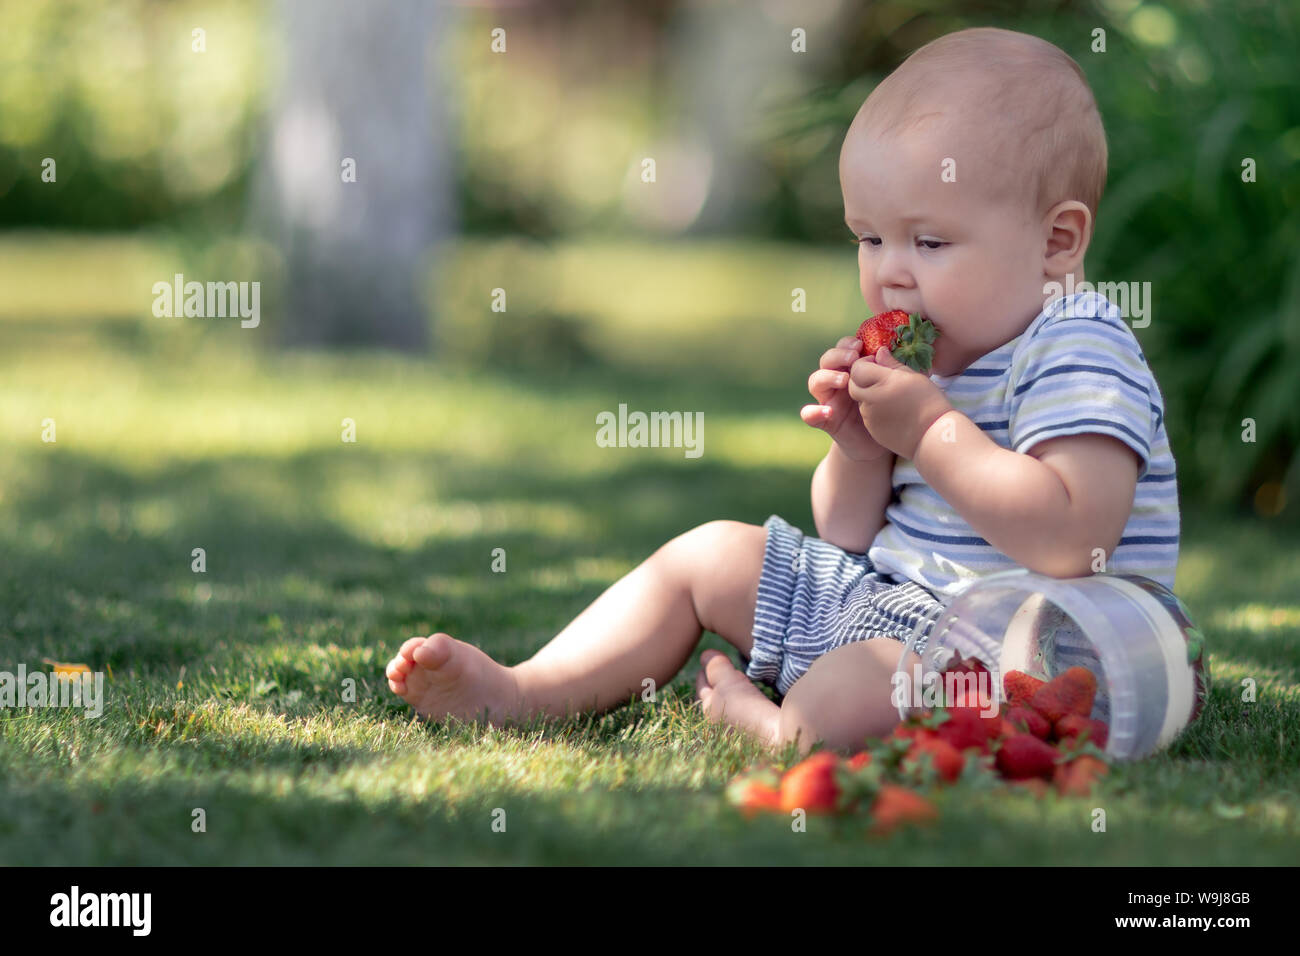 Cute baby sitting on the grass in the garden and taste strawberries Stock Photo